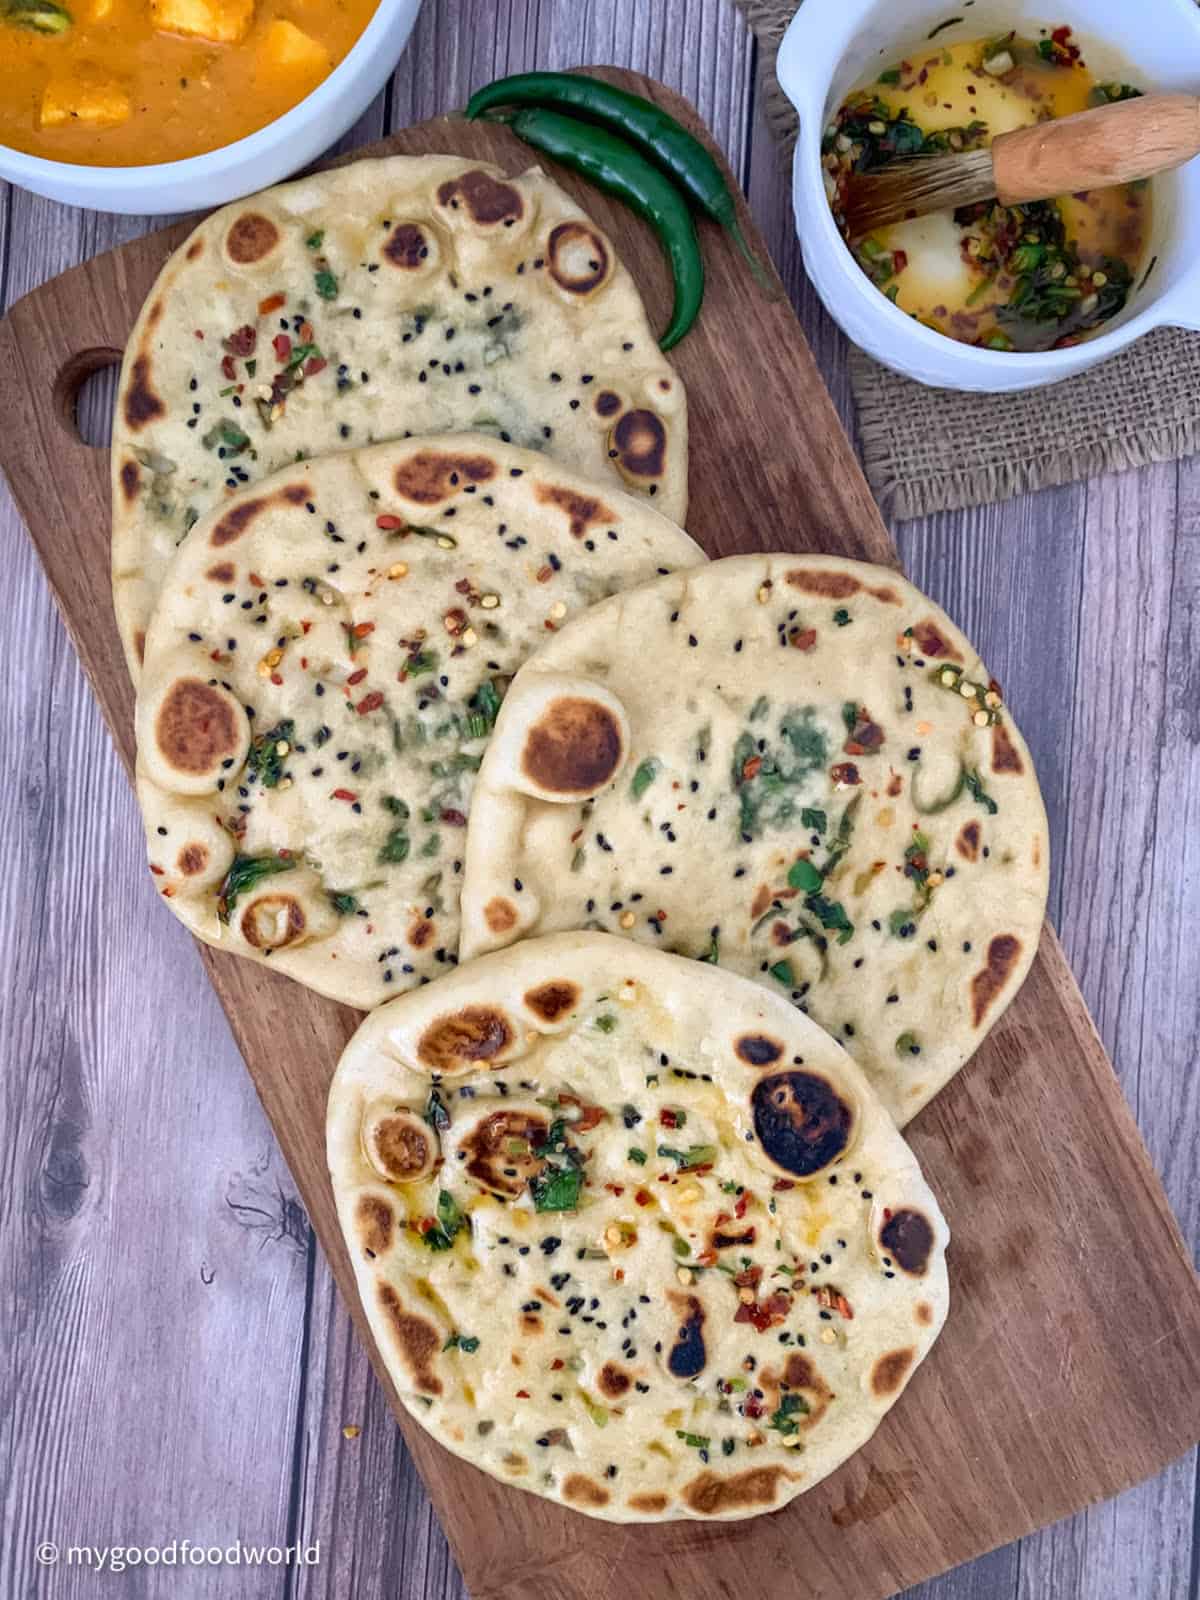 Naan breads with spicy toppings such as nigella seeds, cilantro, and red pepper flakes are placed on a wooden board overlapping each other. Next to the board, there is some ghee with spices in a round, white bowl, two green chilies, and a bowl of curry.